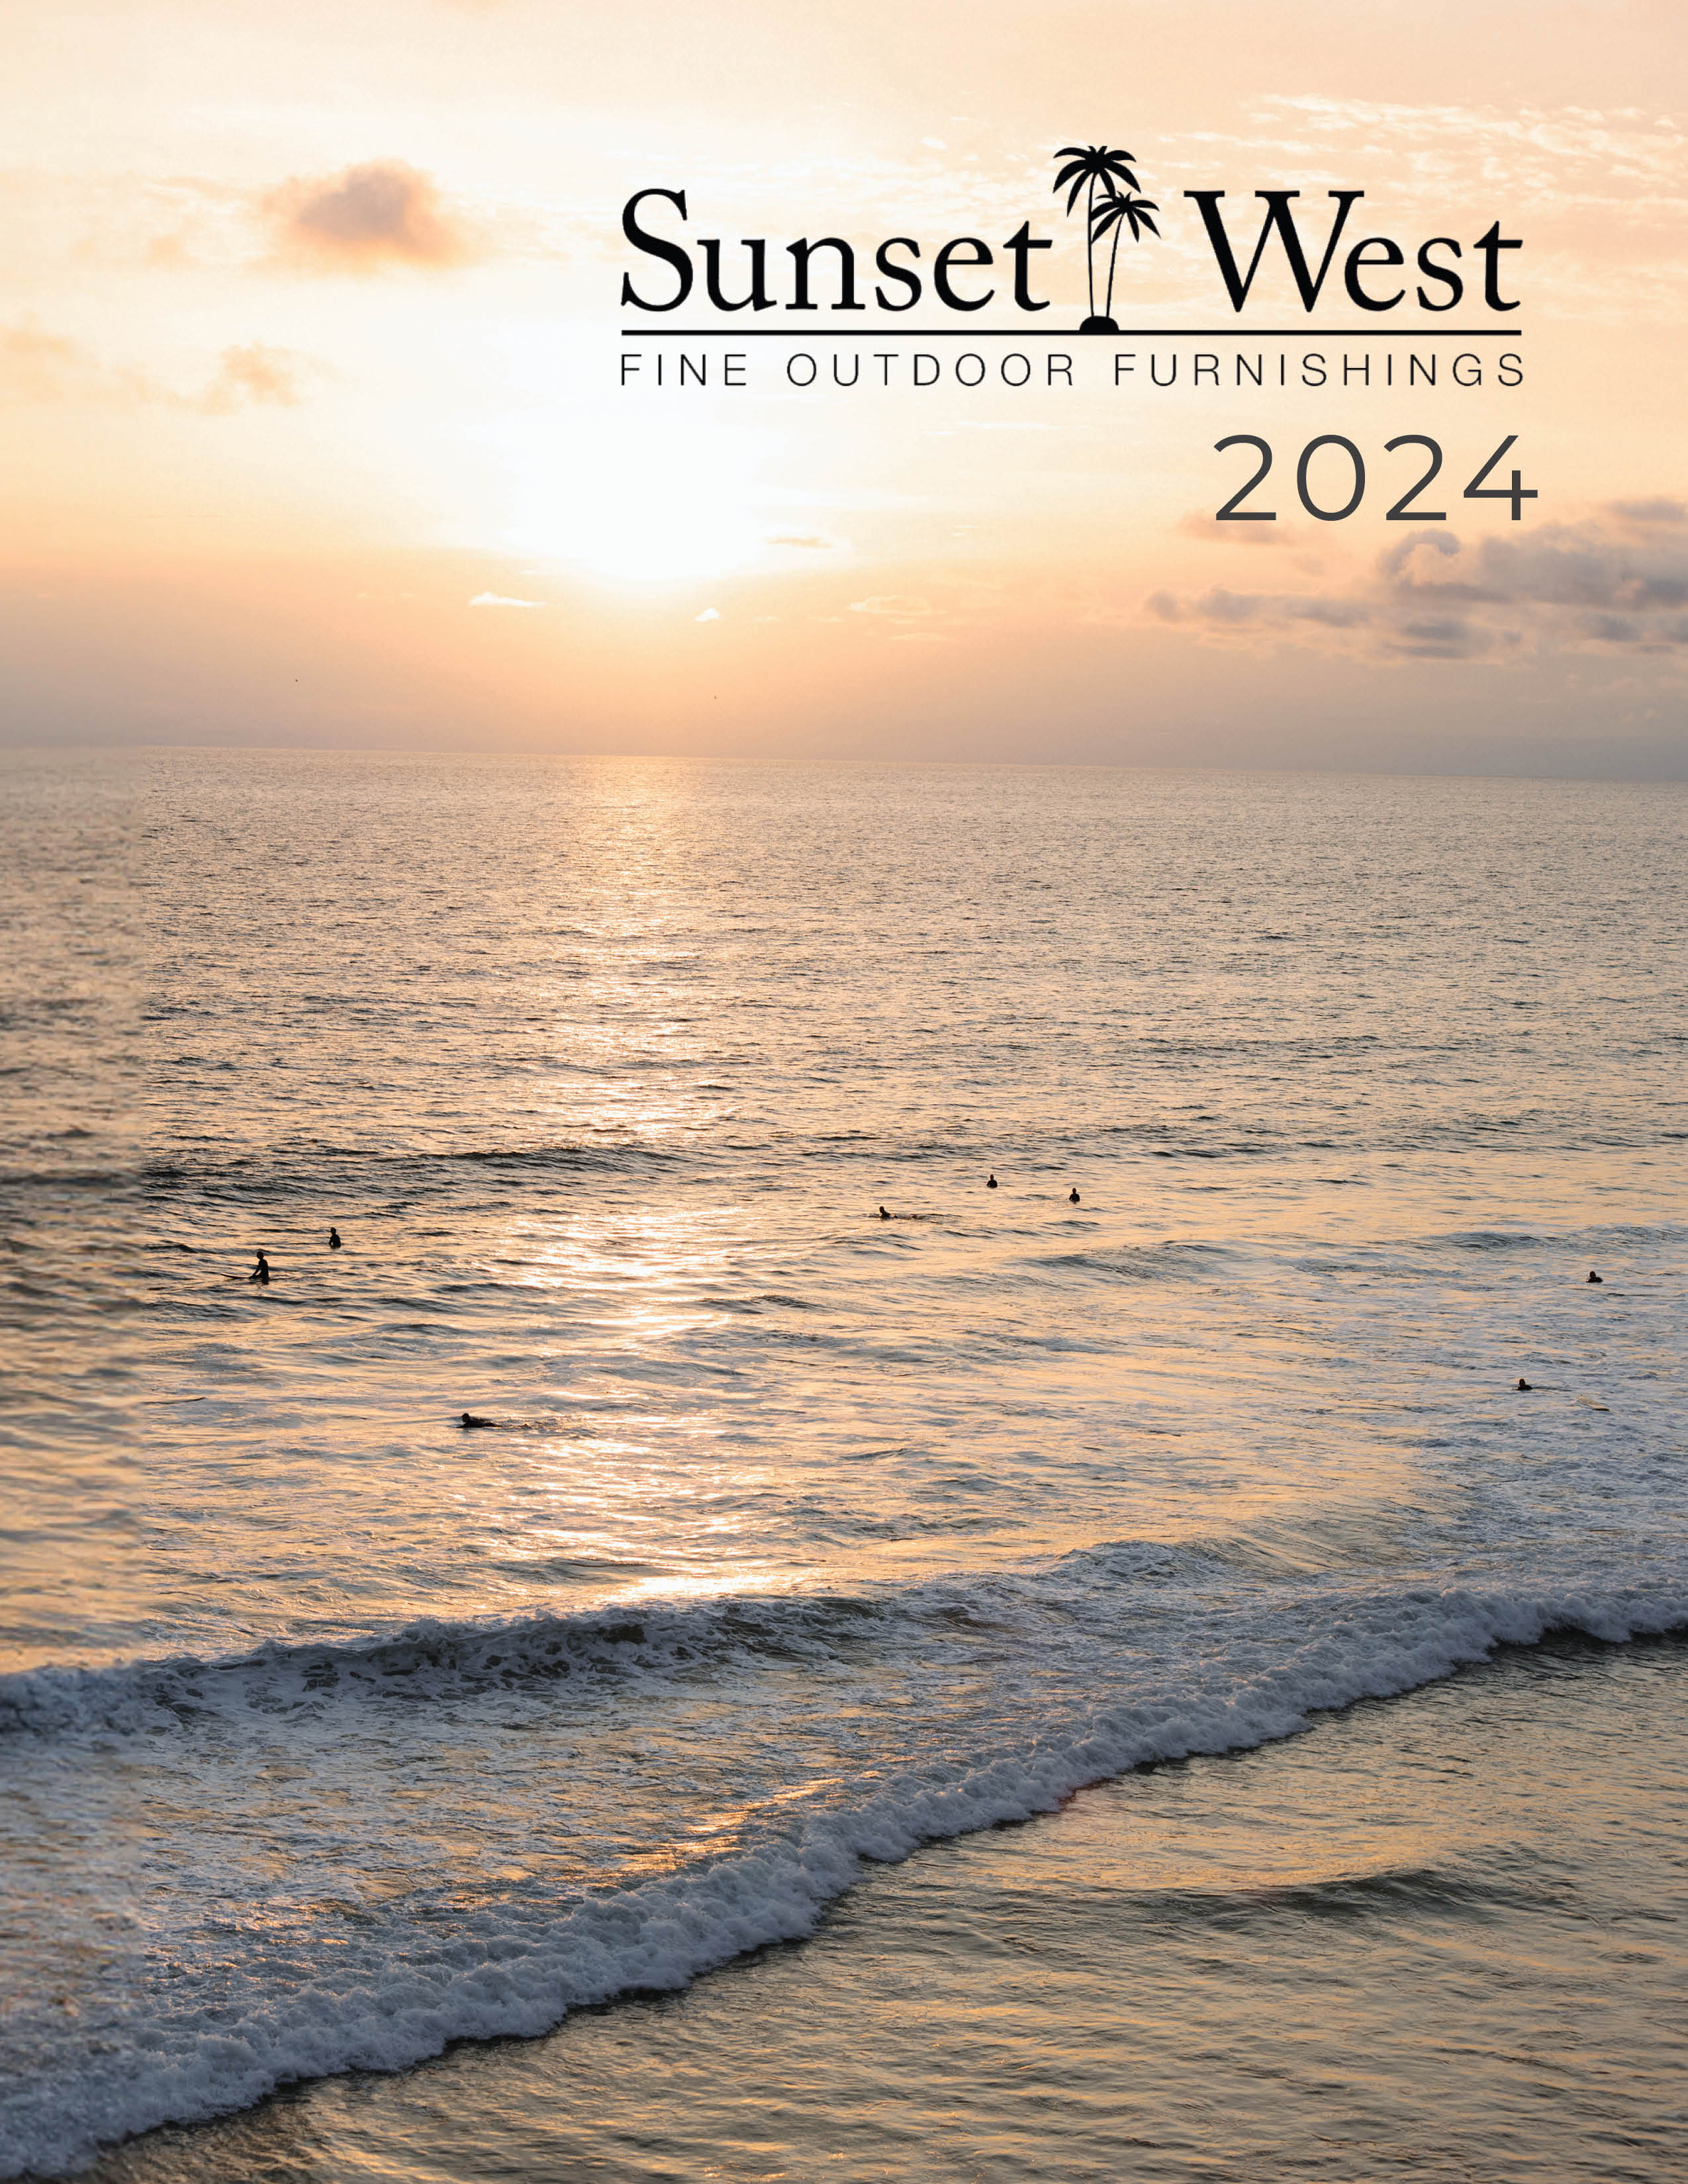 Discover Sunset West